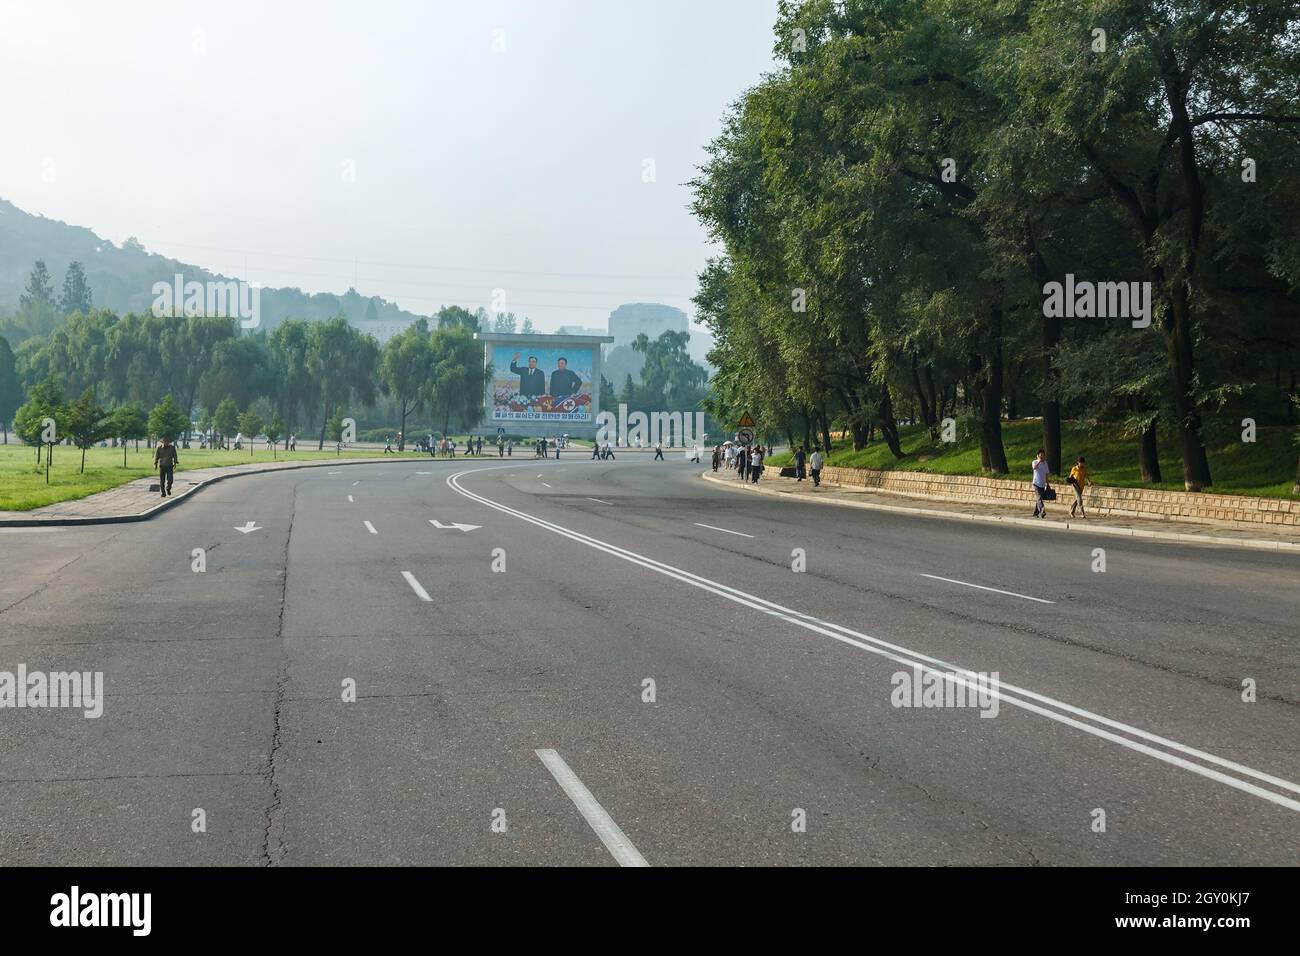 Pyongyang, North Korea - July 28, 2014: An empty road on a street in Pyongyang. A panel depicting North Korean leaders Kim Il Sung and Kim Jong Il on Stock Photo